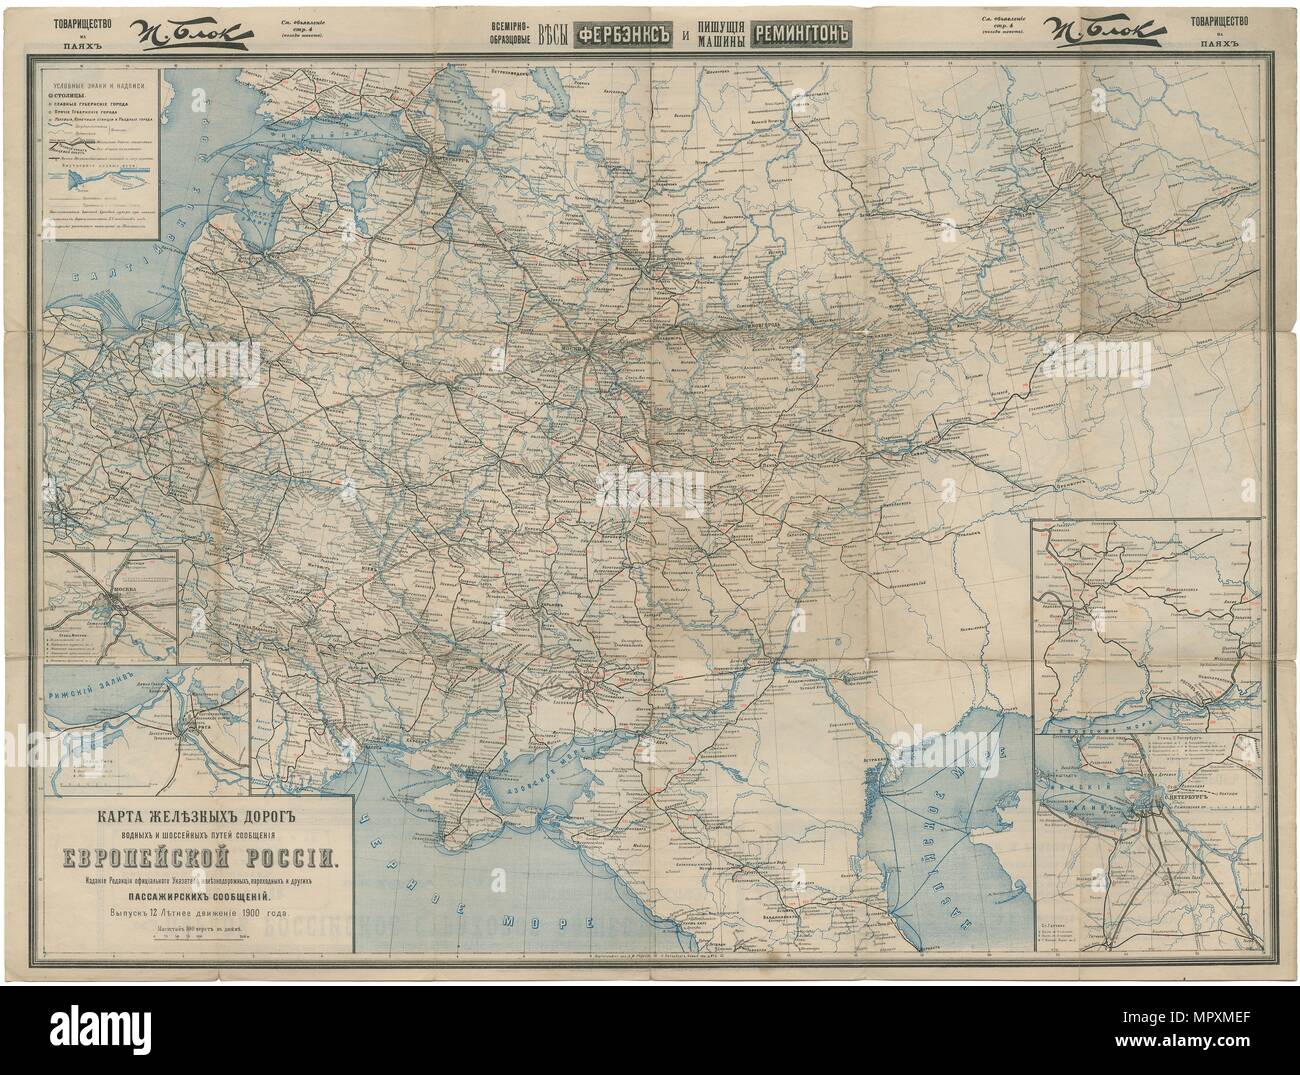 Map of Roads, Railroads and Inland Waterways of the Russian Empire, 1900, 1900. Stock Photo